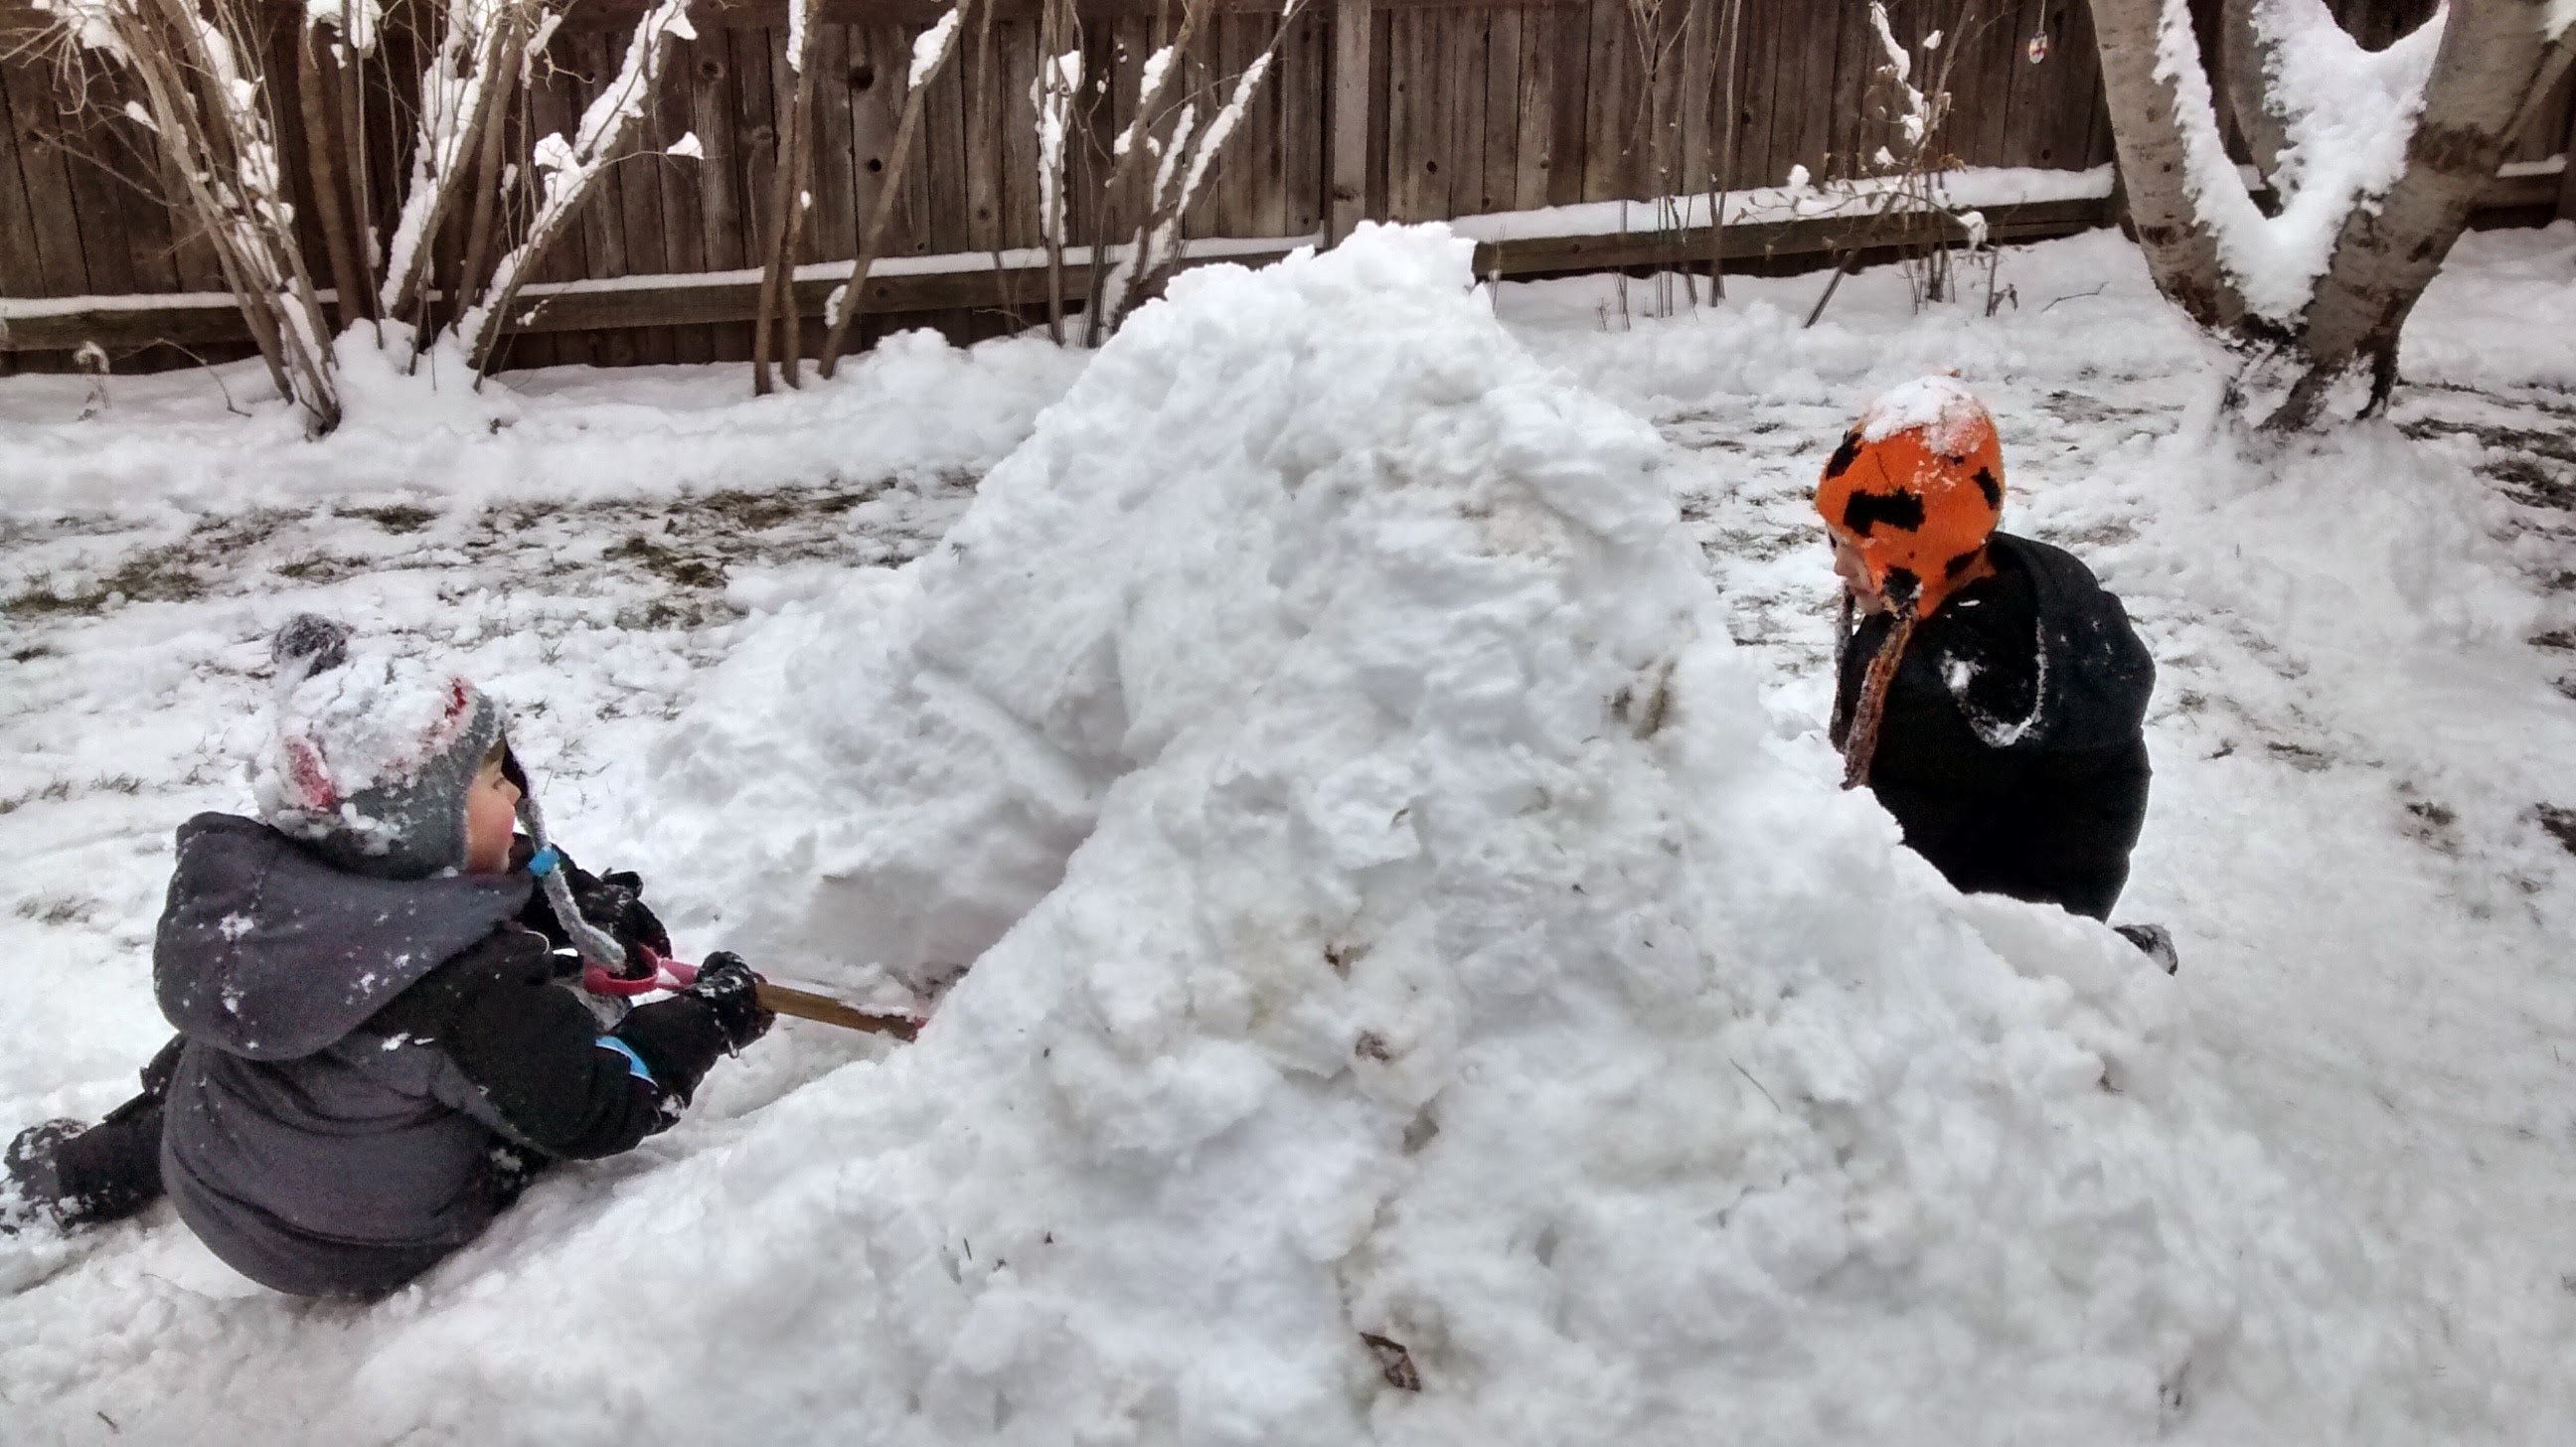 Number 54: Build a snow cave